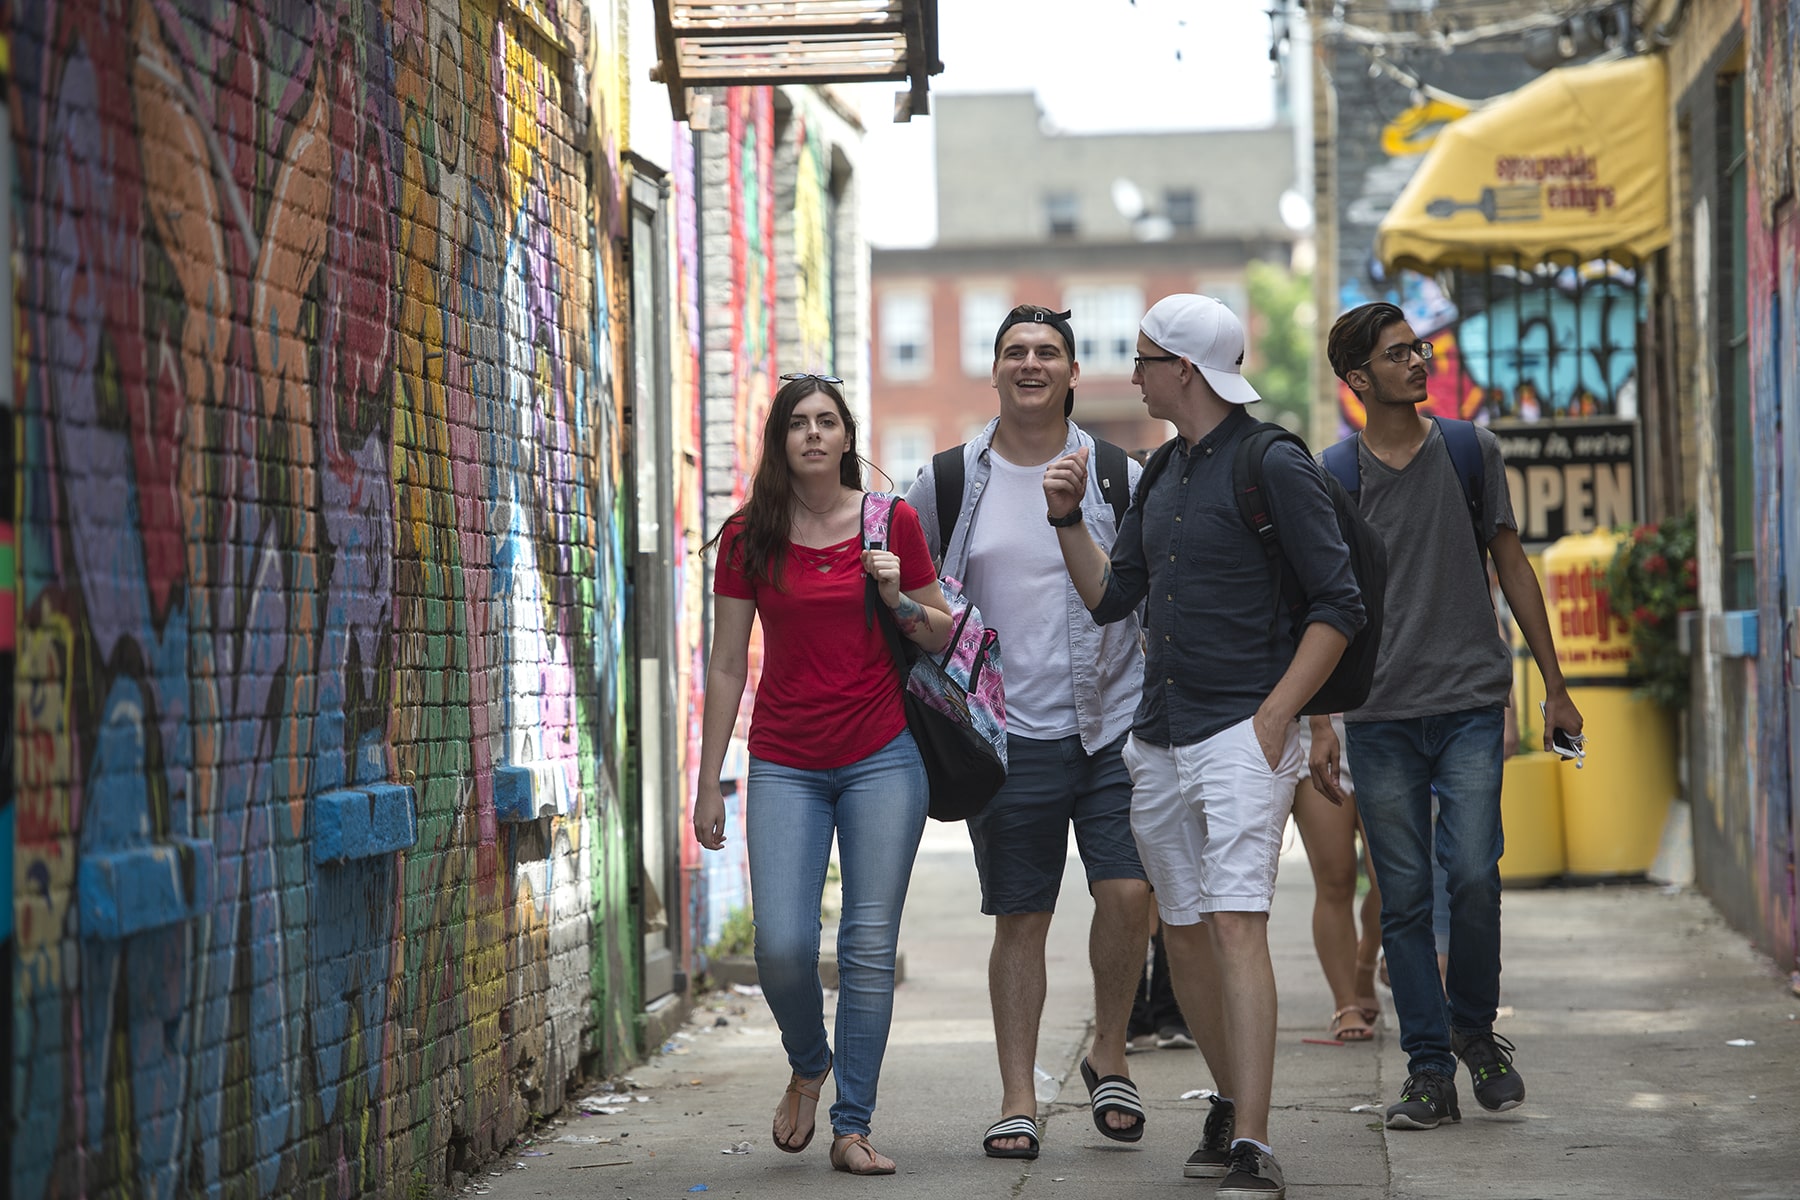 small group of students walking down graffitied alley